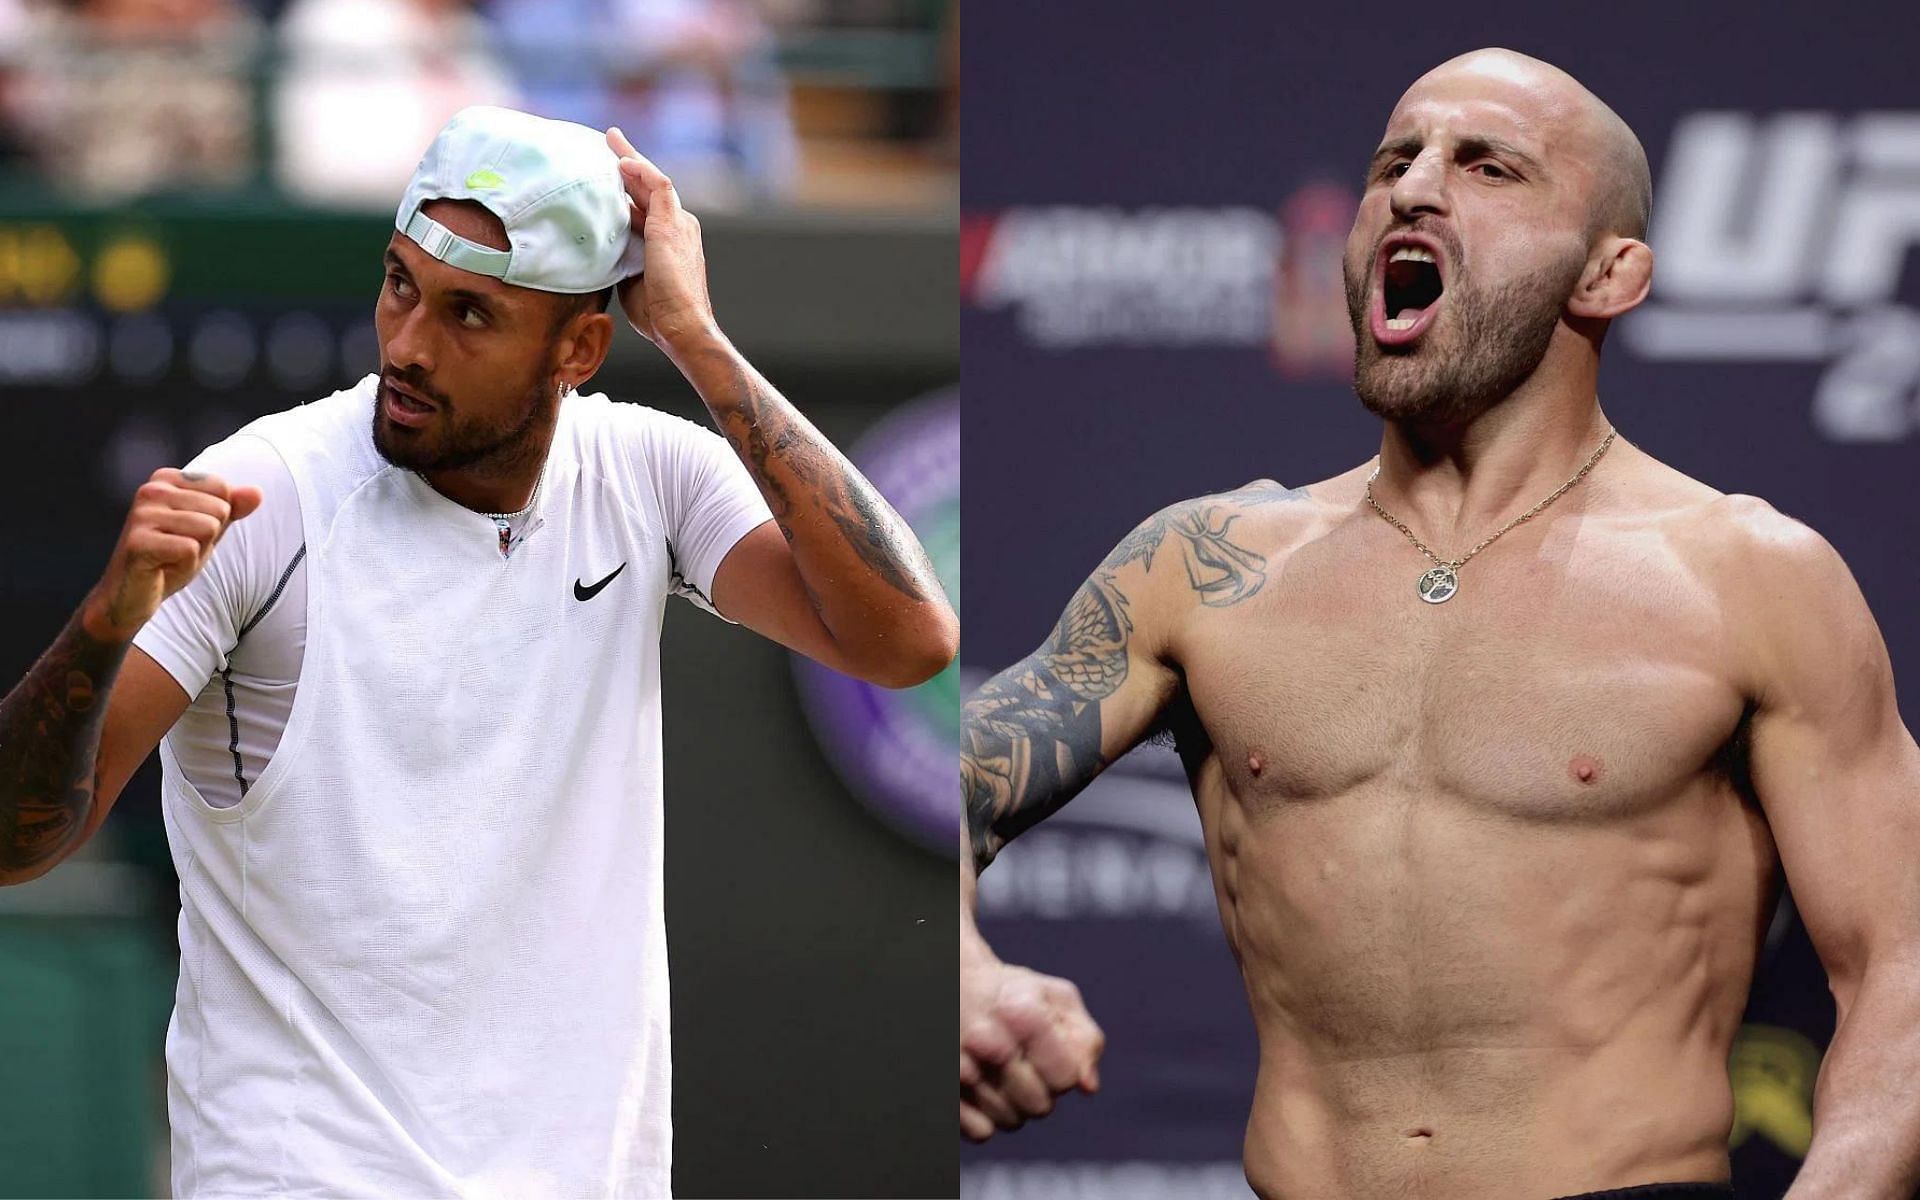 Nick Kyrgios (left) and Alexander Volkanovski (right) [Images courtesy of Getty]